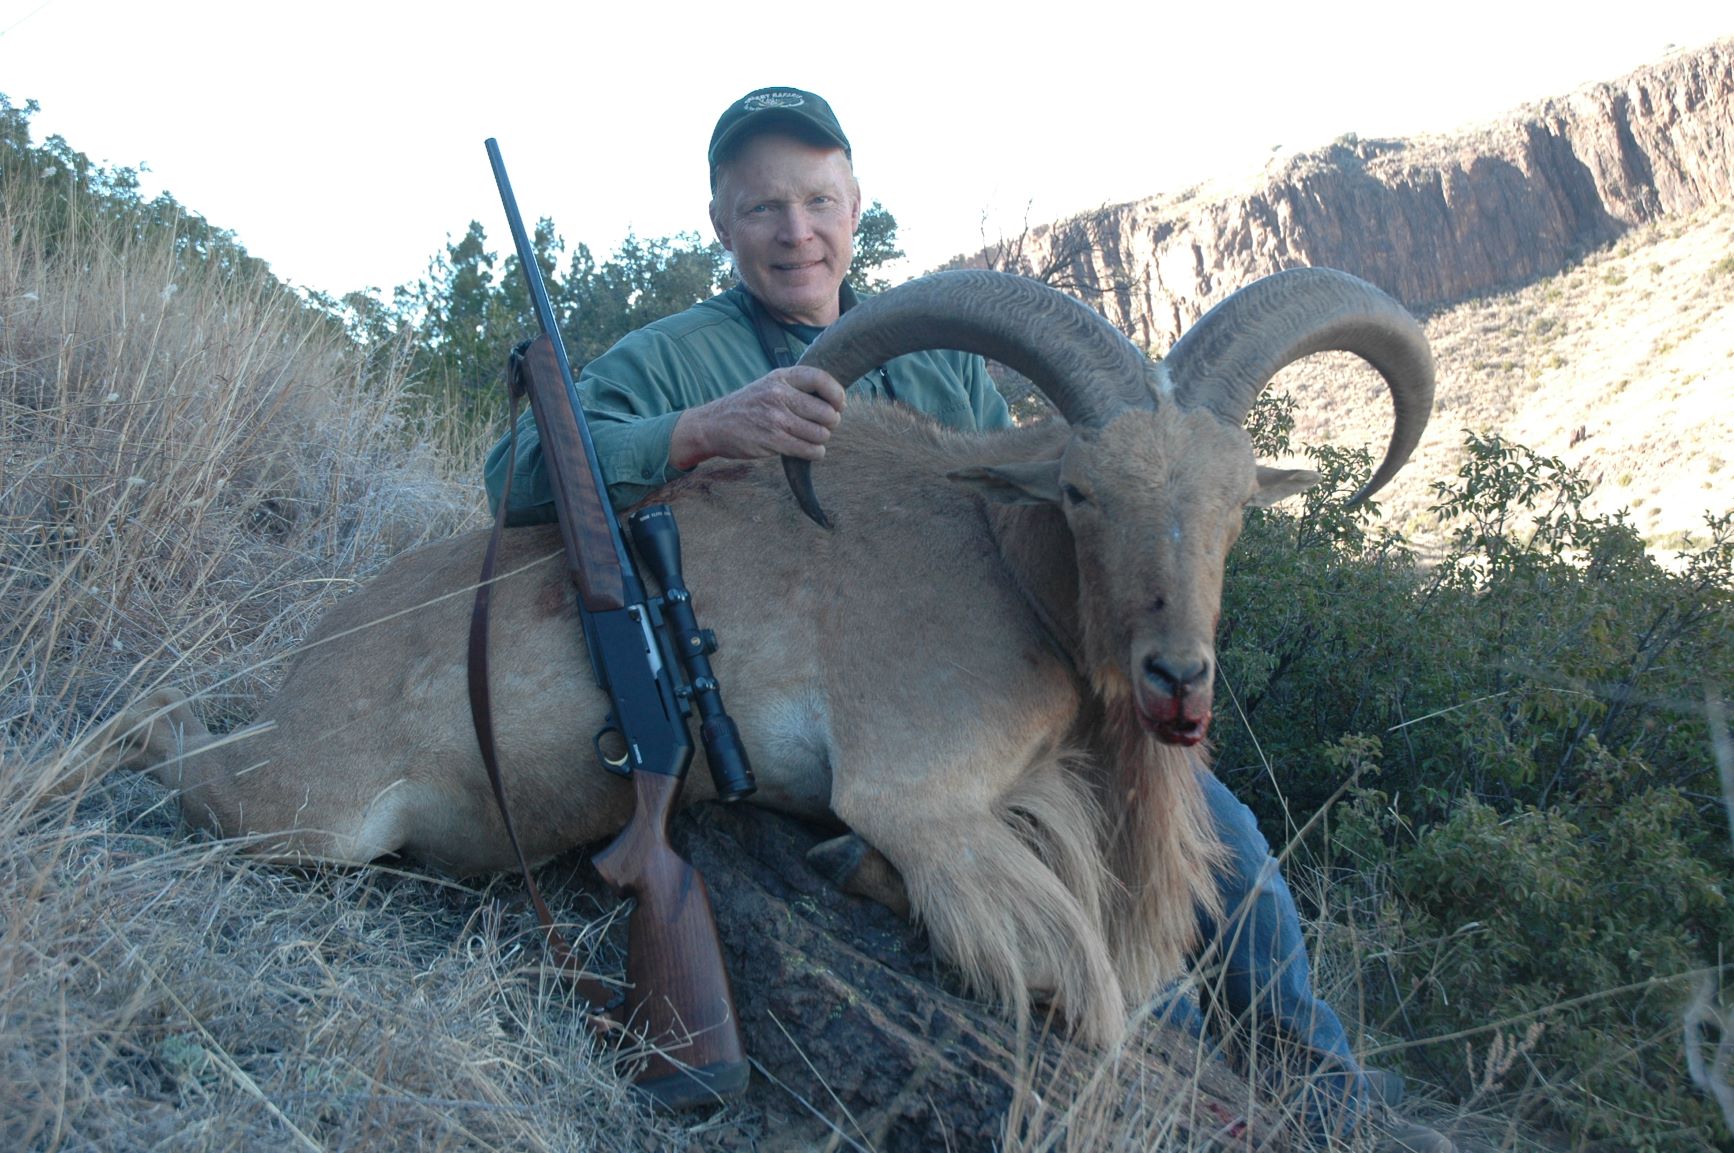  Semiautomatic .308s are more common than .30-06 self-loaders. Browning’s BLR in both short and long-action is chambered to both. This big aoudad was taken with a left-hand short-action BLR in .308.